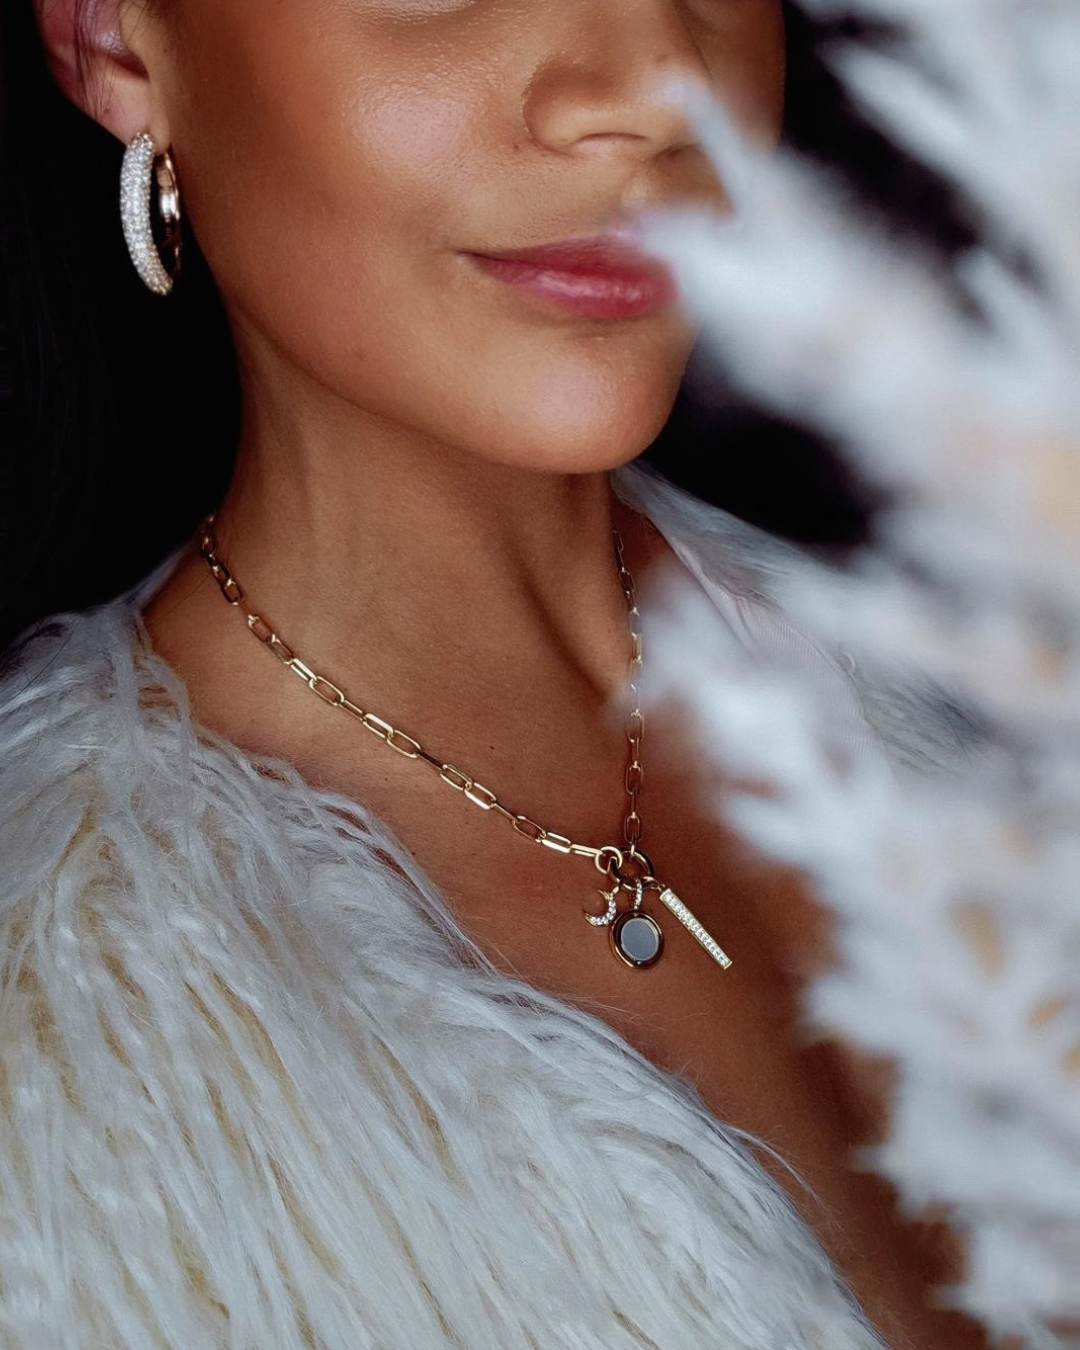 a person wearing a white fur coat and earrings